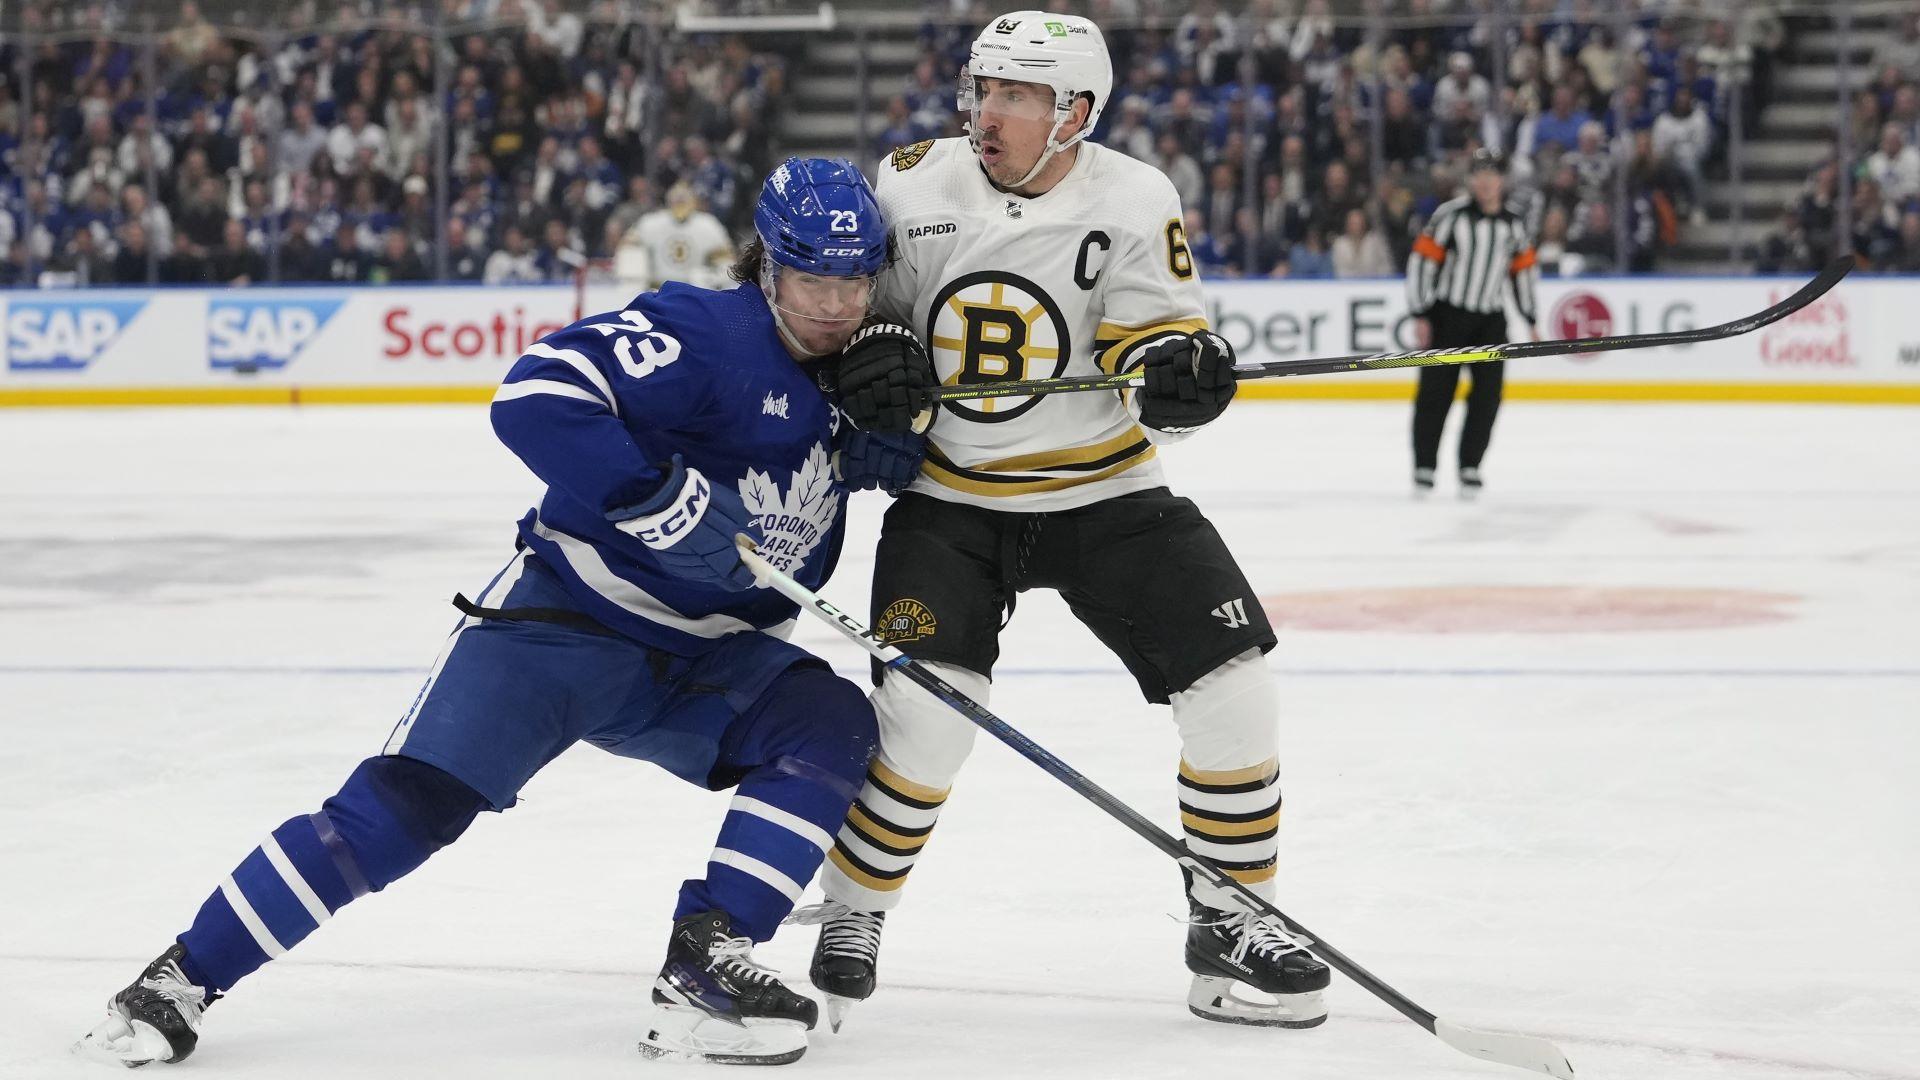 The Maple Leafs player gave advice to Toronto